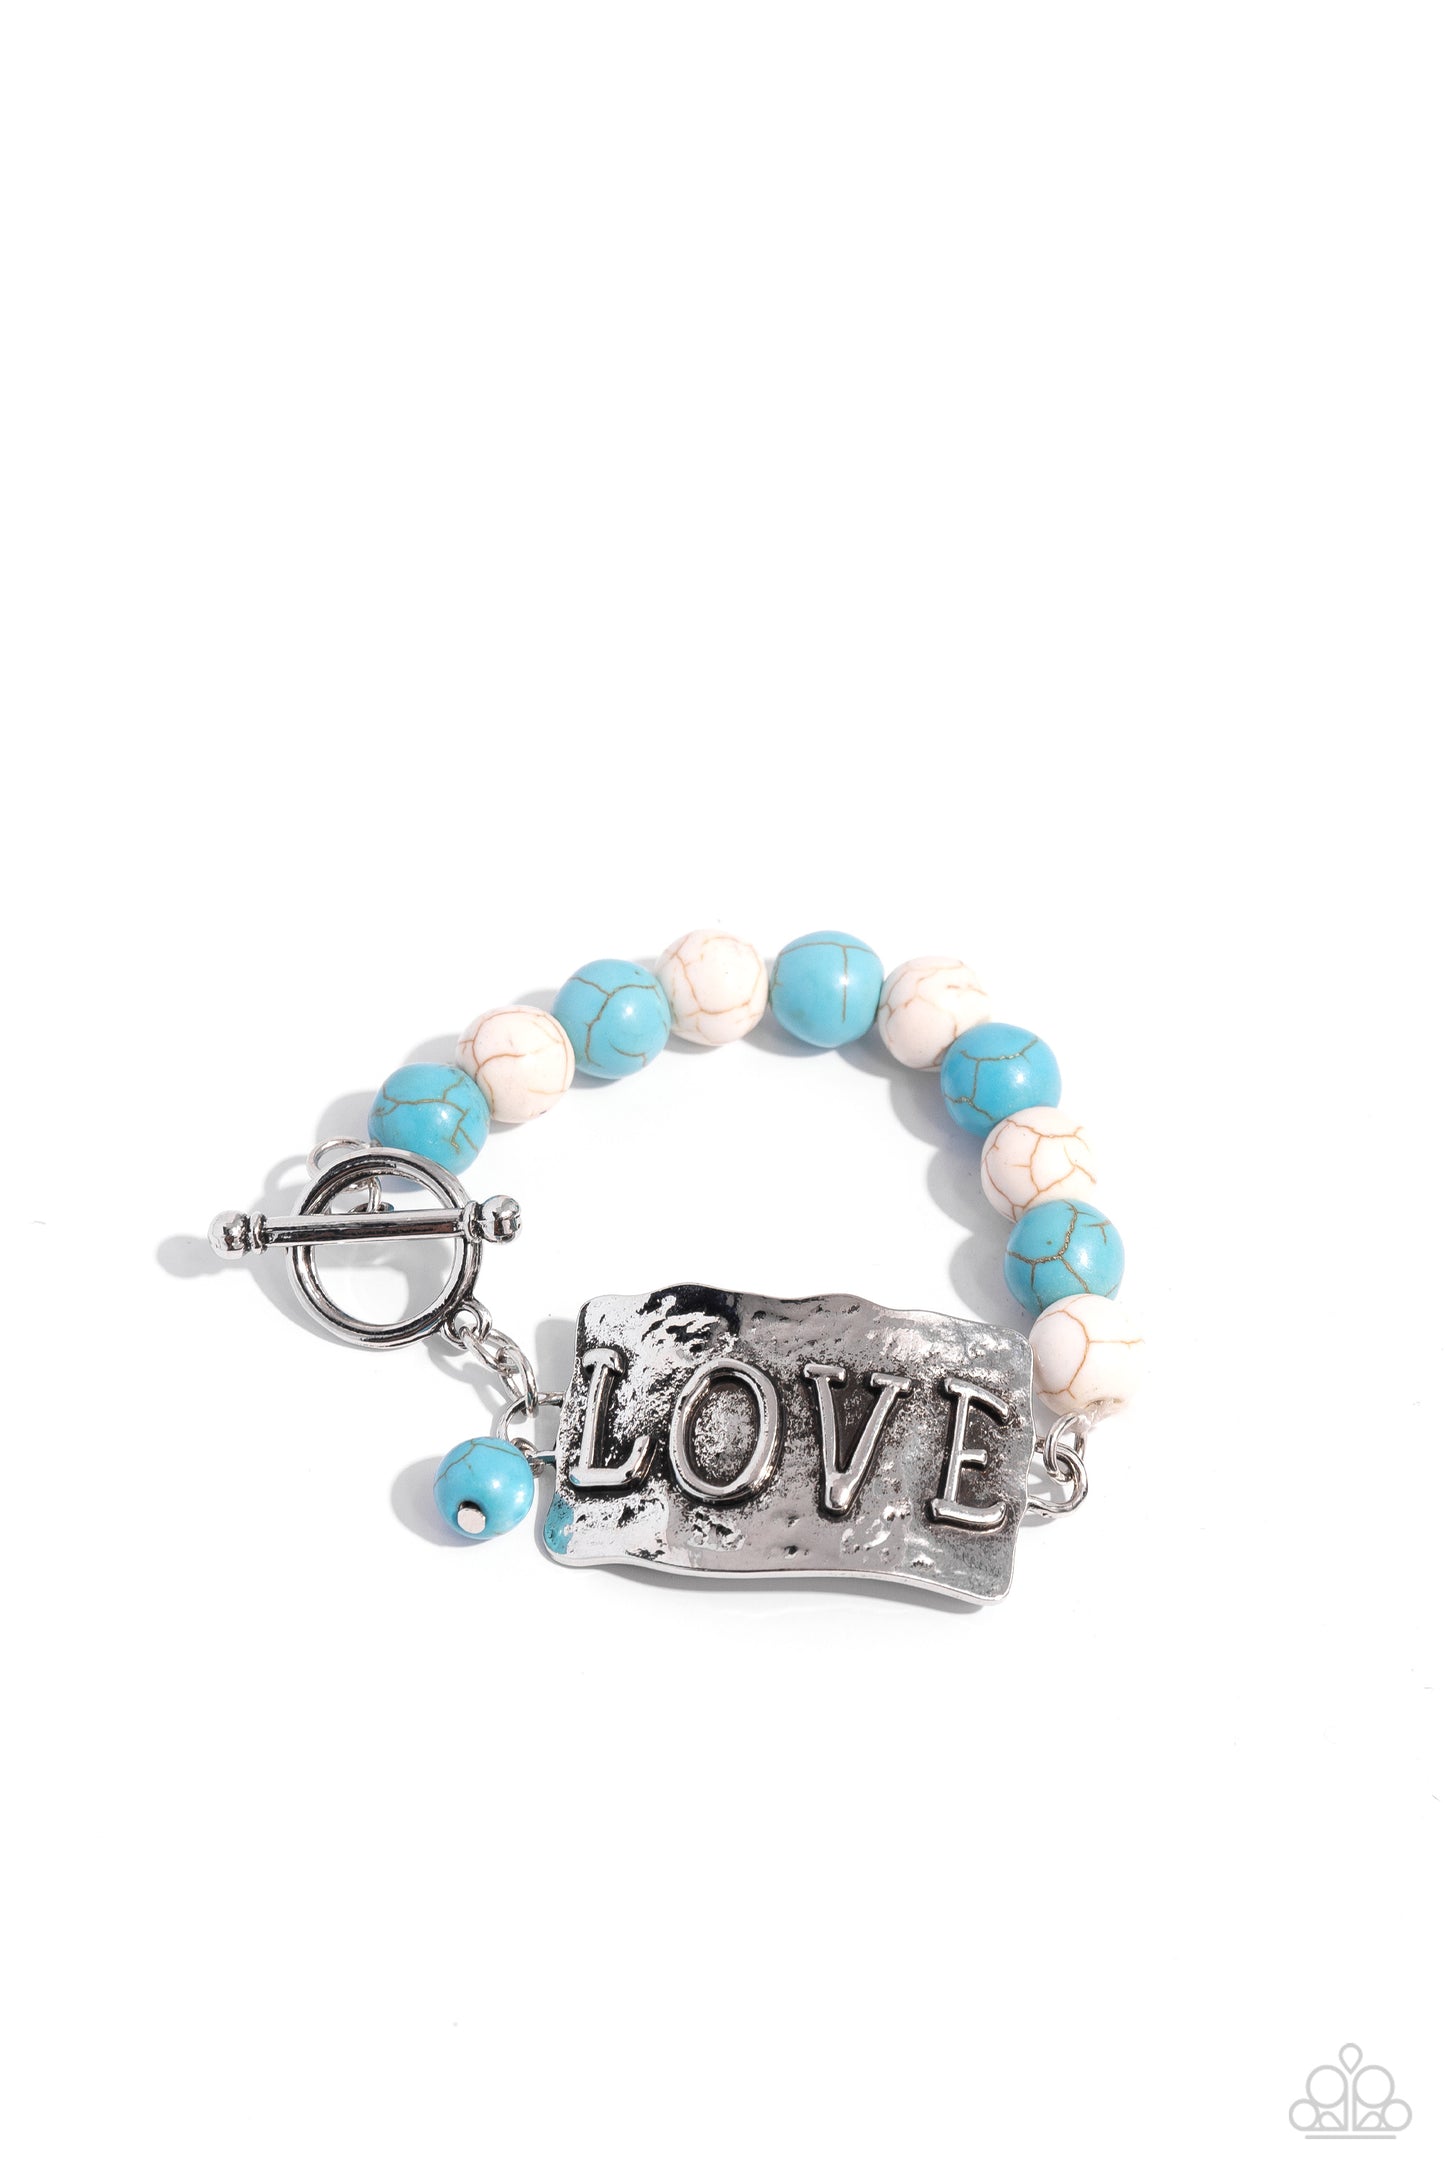 Lovely Stones - Multi Colored Stone Beads & Silver "LOVE" Plate Paparazzi Toggle Bracelet